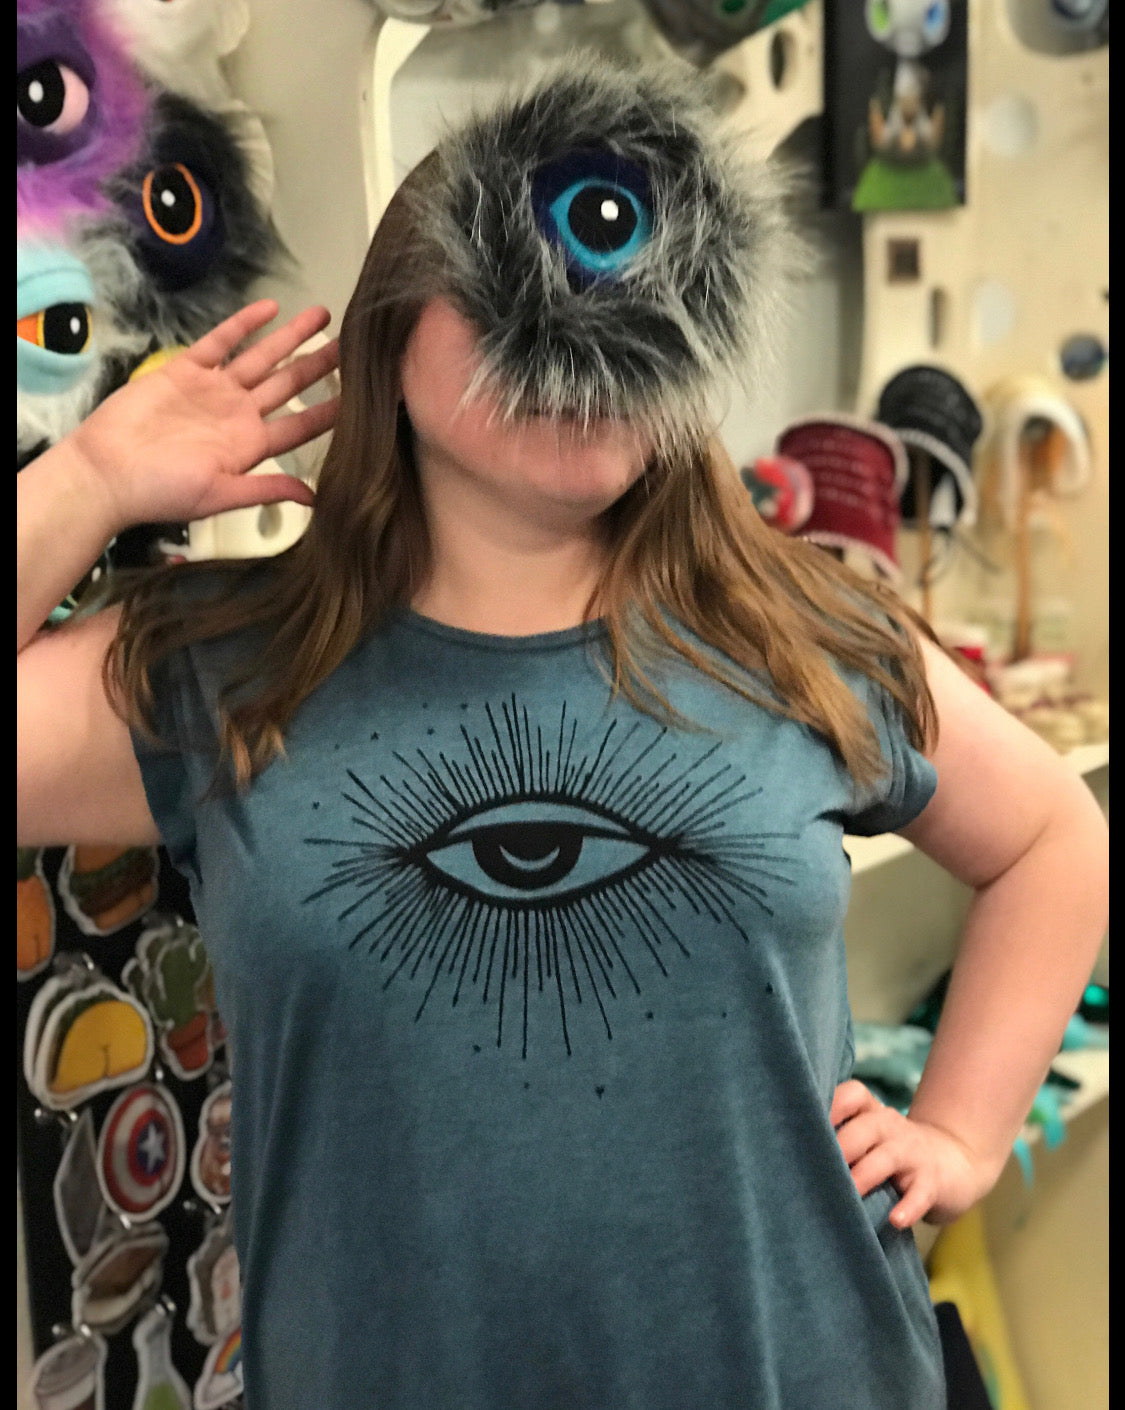 Person wearing teal blue muscle shirt - loose fitting - and with a furry monster eyeball covering their face.